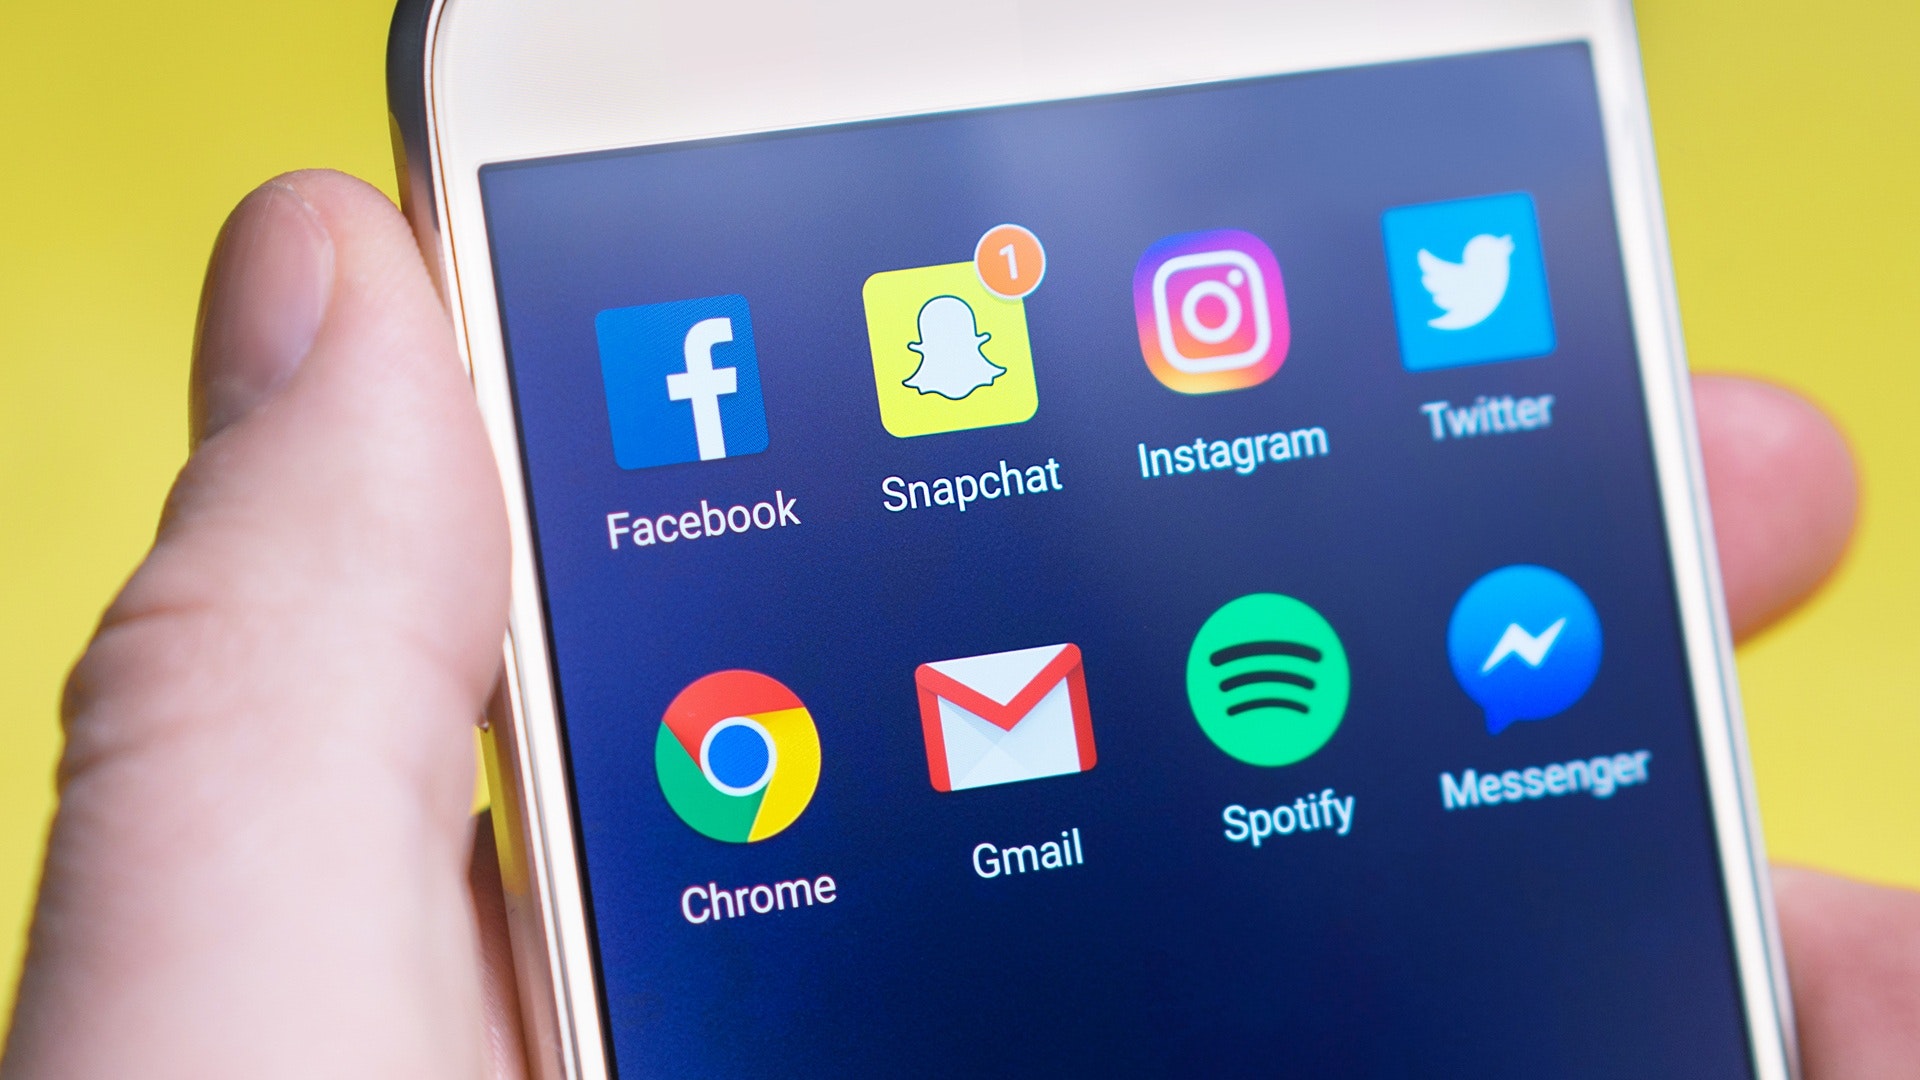 Social Features of a Popular Mobile App